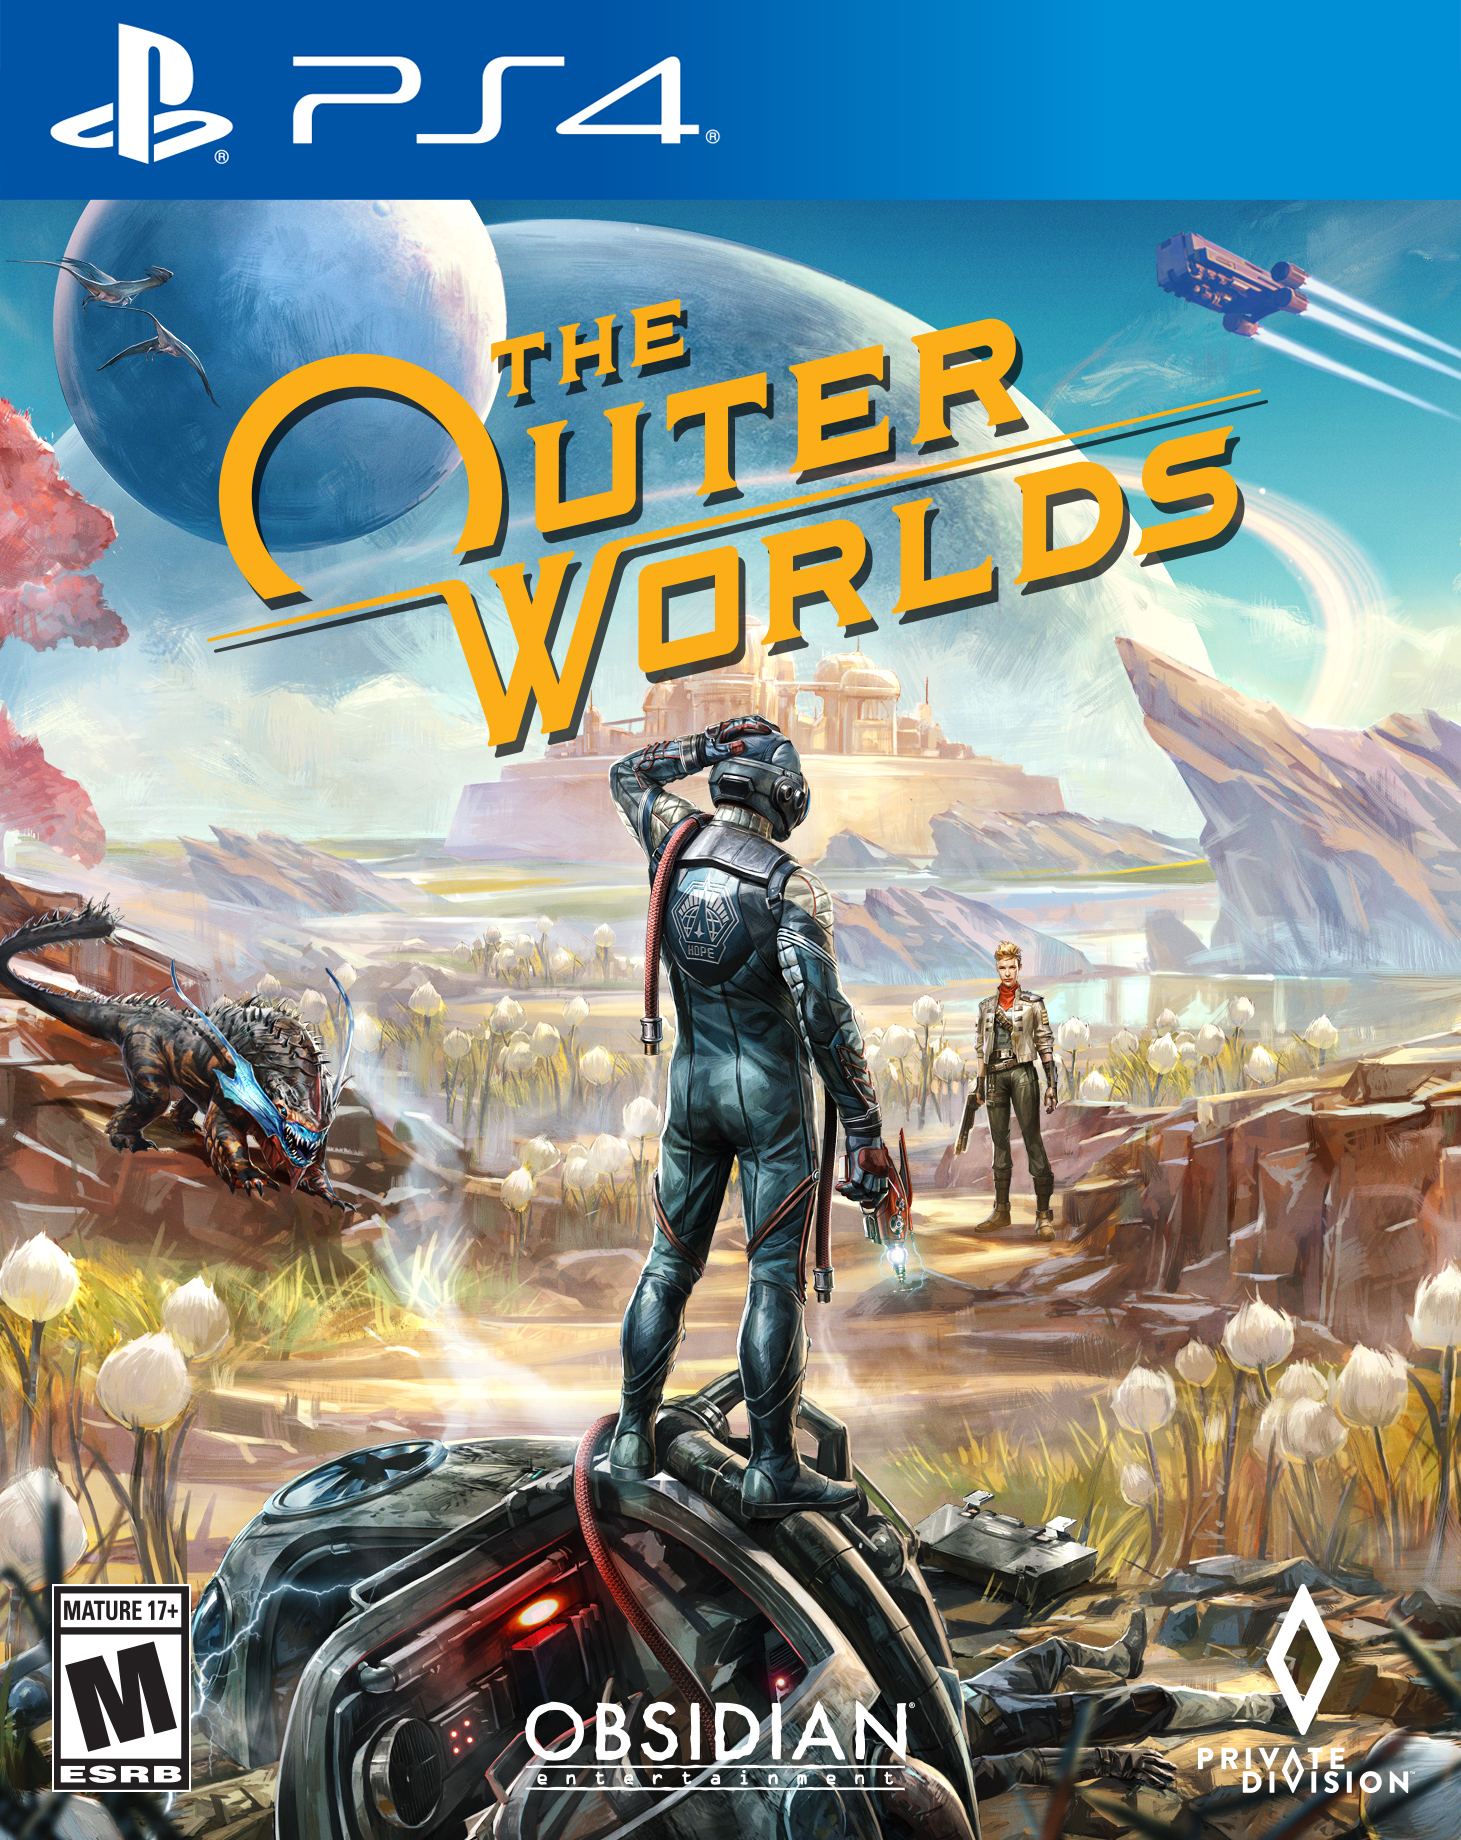 The Outer Worlds, Private Division, PlayStation 4, 710425575150 - image 1 of 11